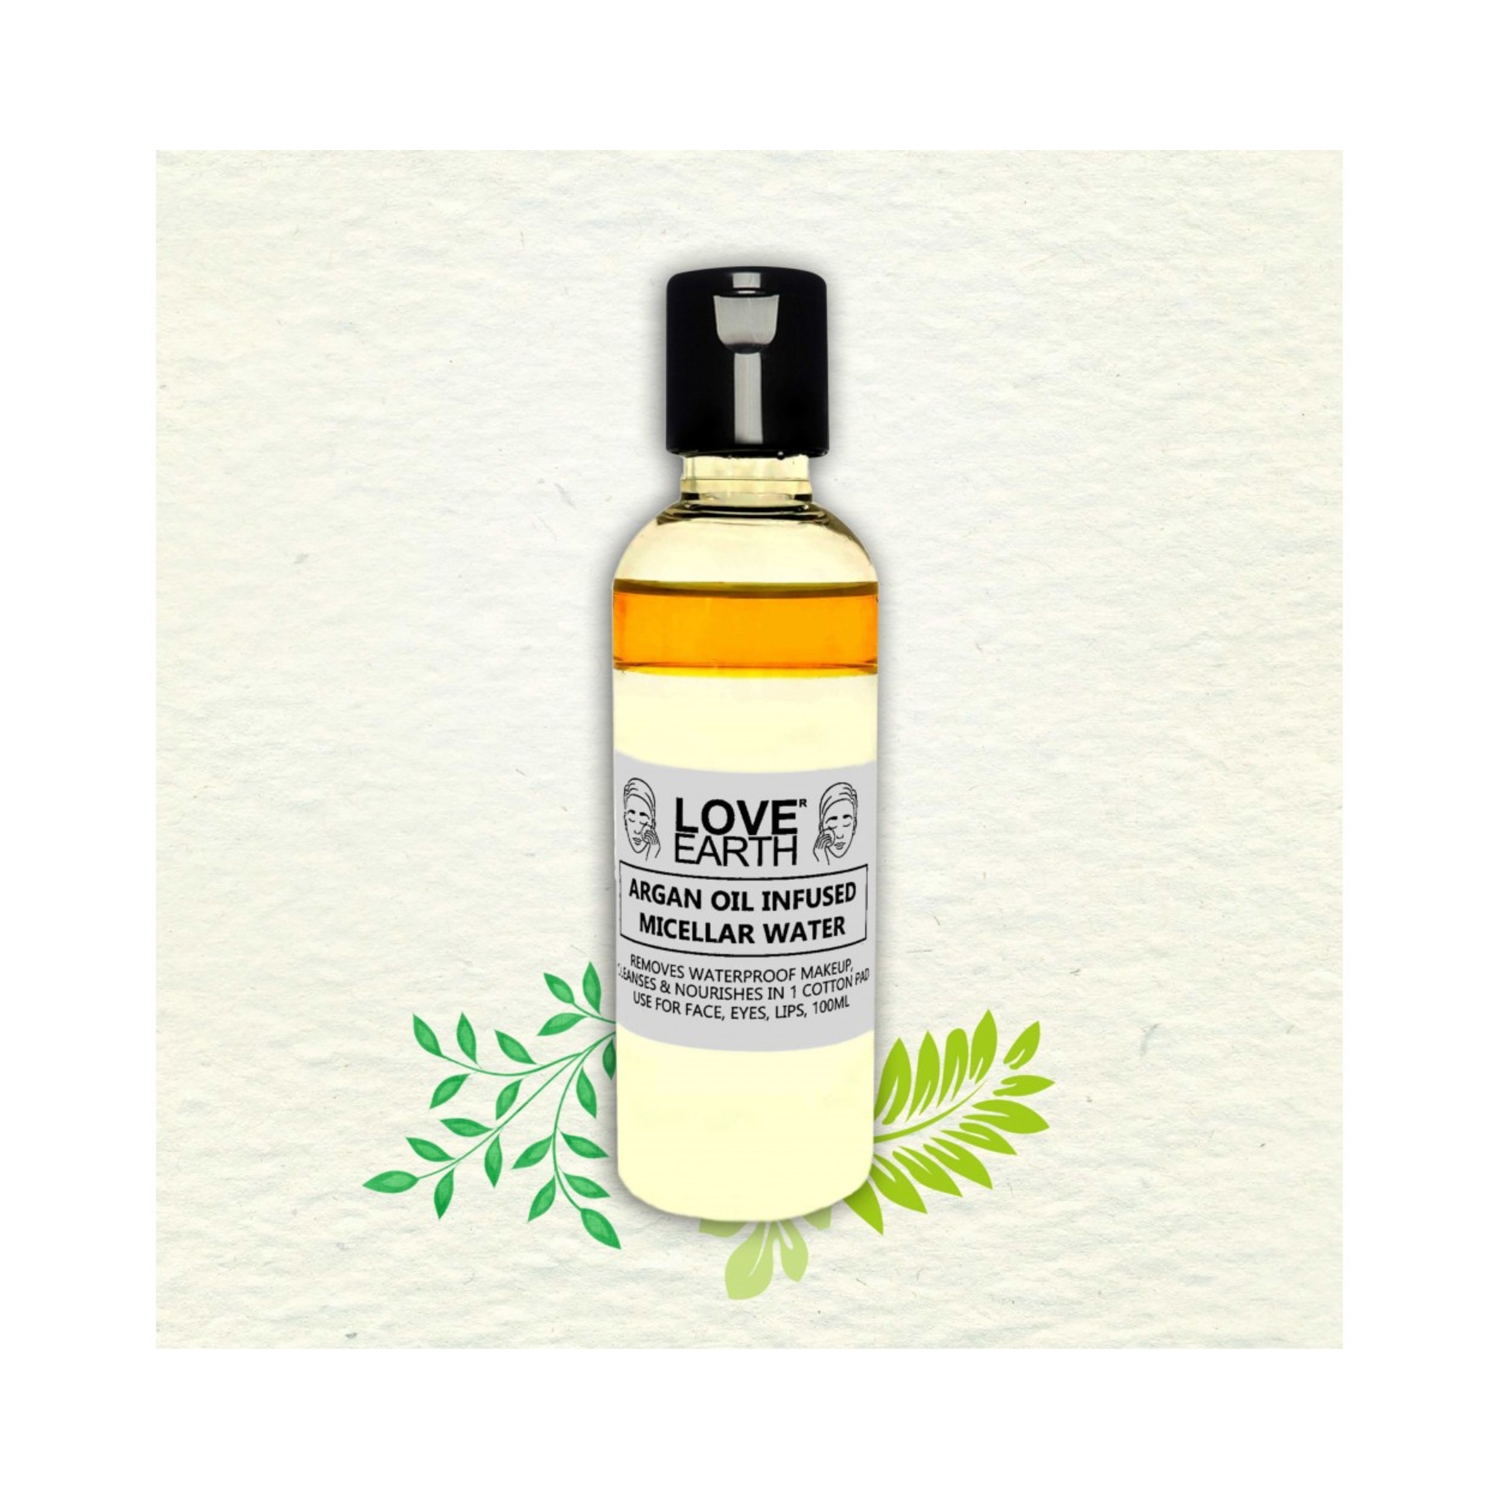 Love Earth | Love Earth Argan Oil-Infused Micellar Water Makeup Remover (100ml)